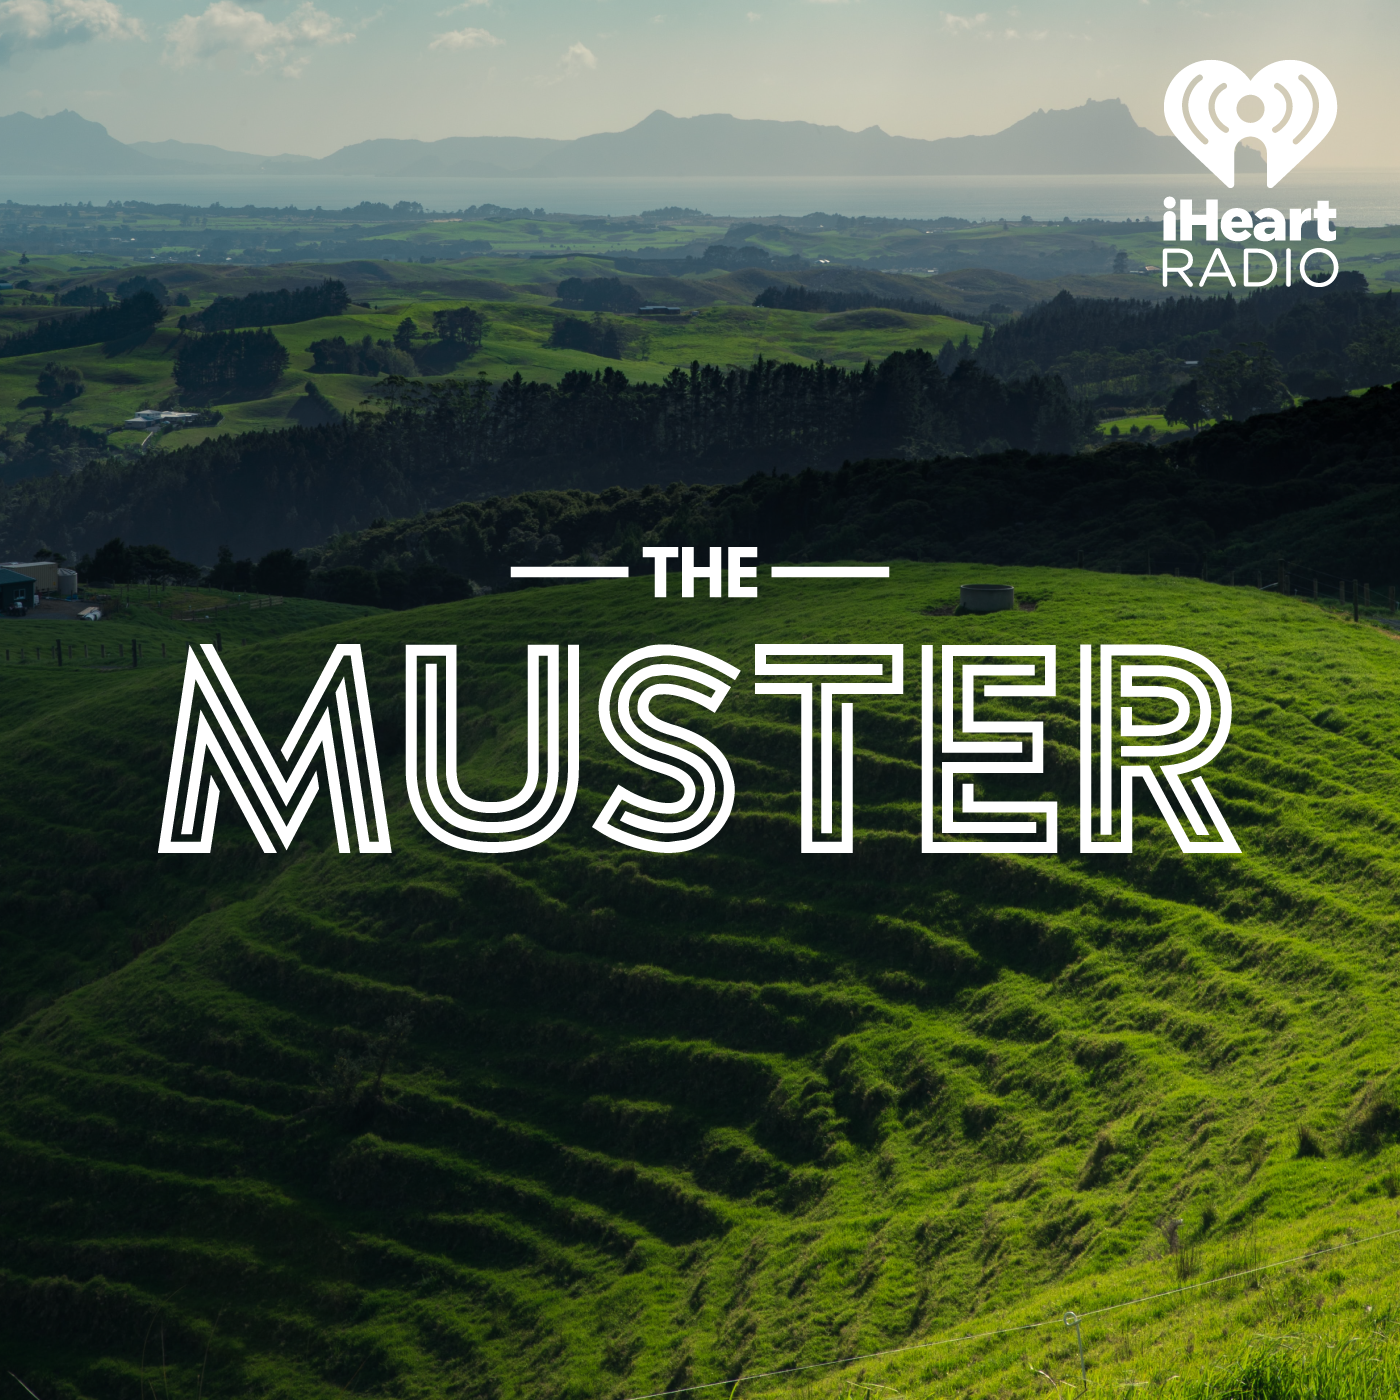 The Muster- Gill Naylor: RWNZ Happenings